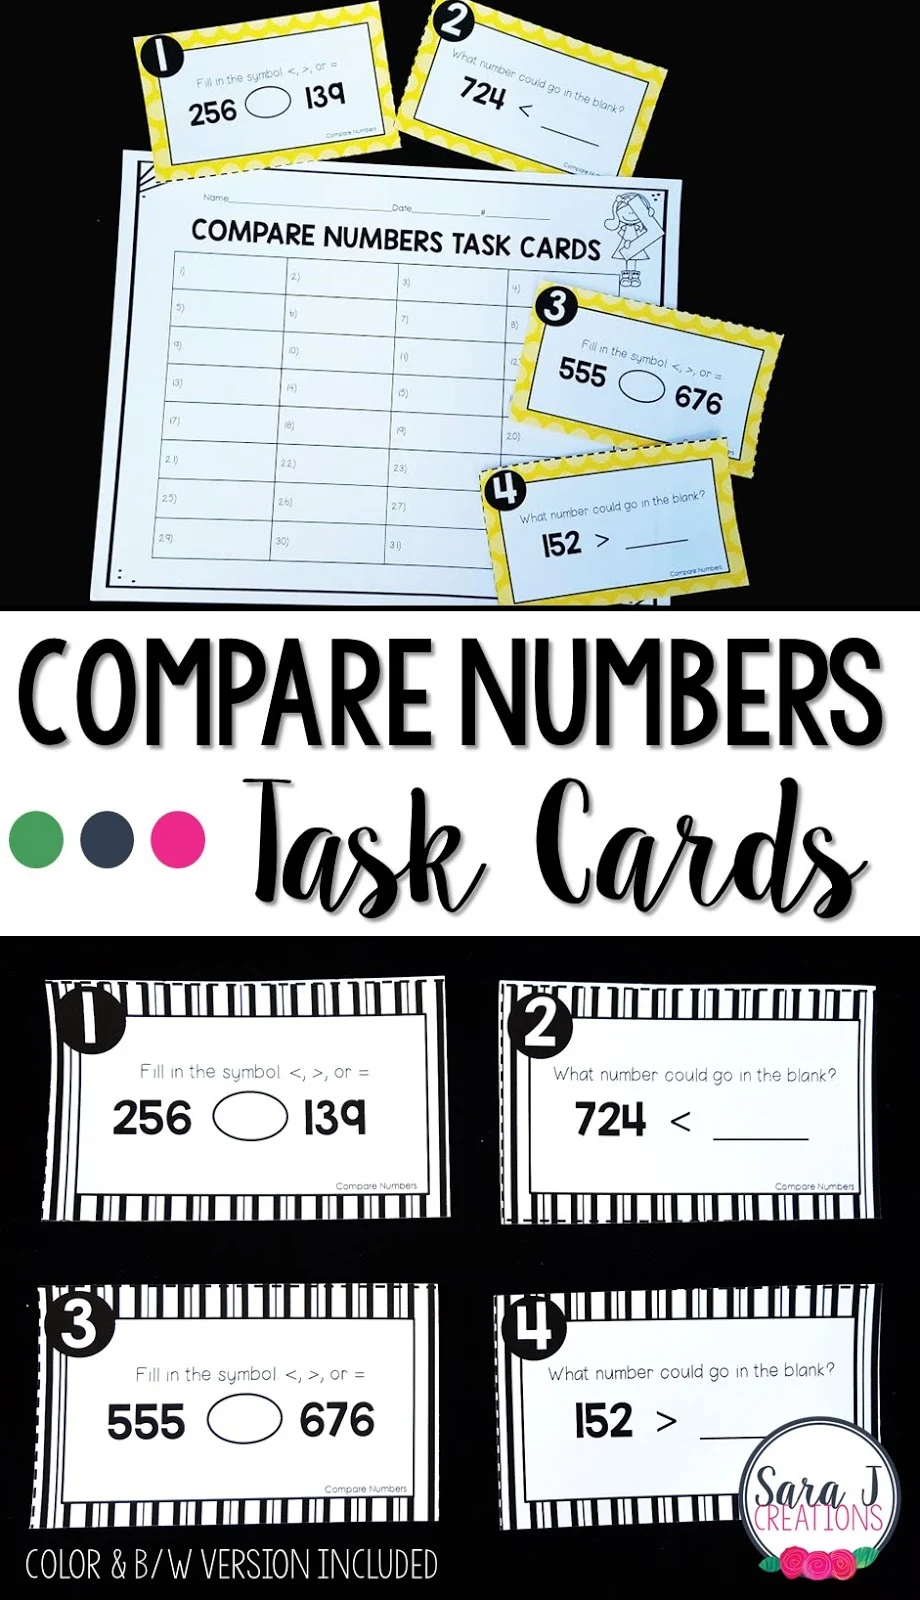 Comparing number task cards for practicing place value